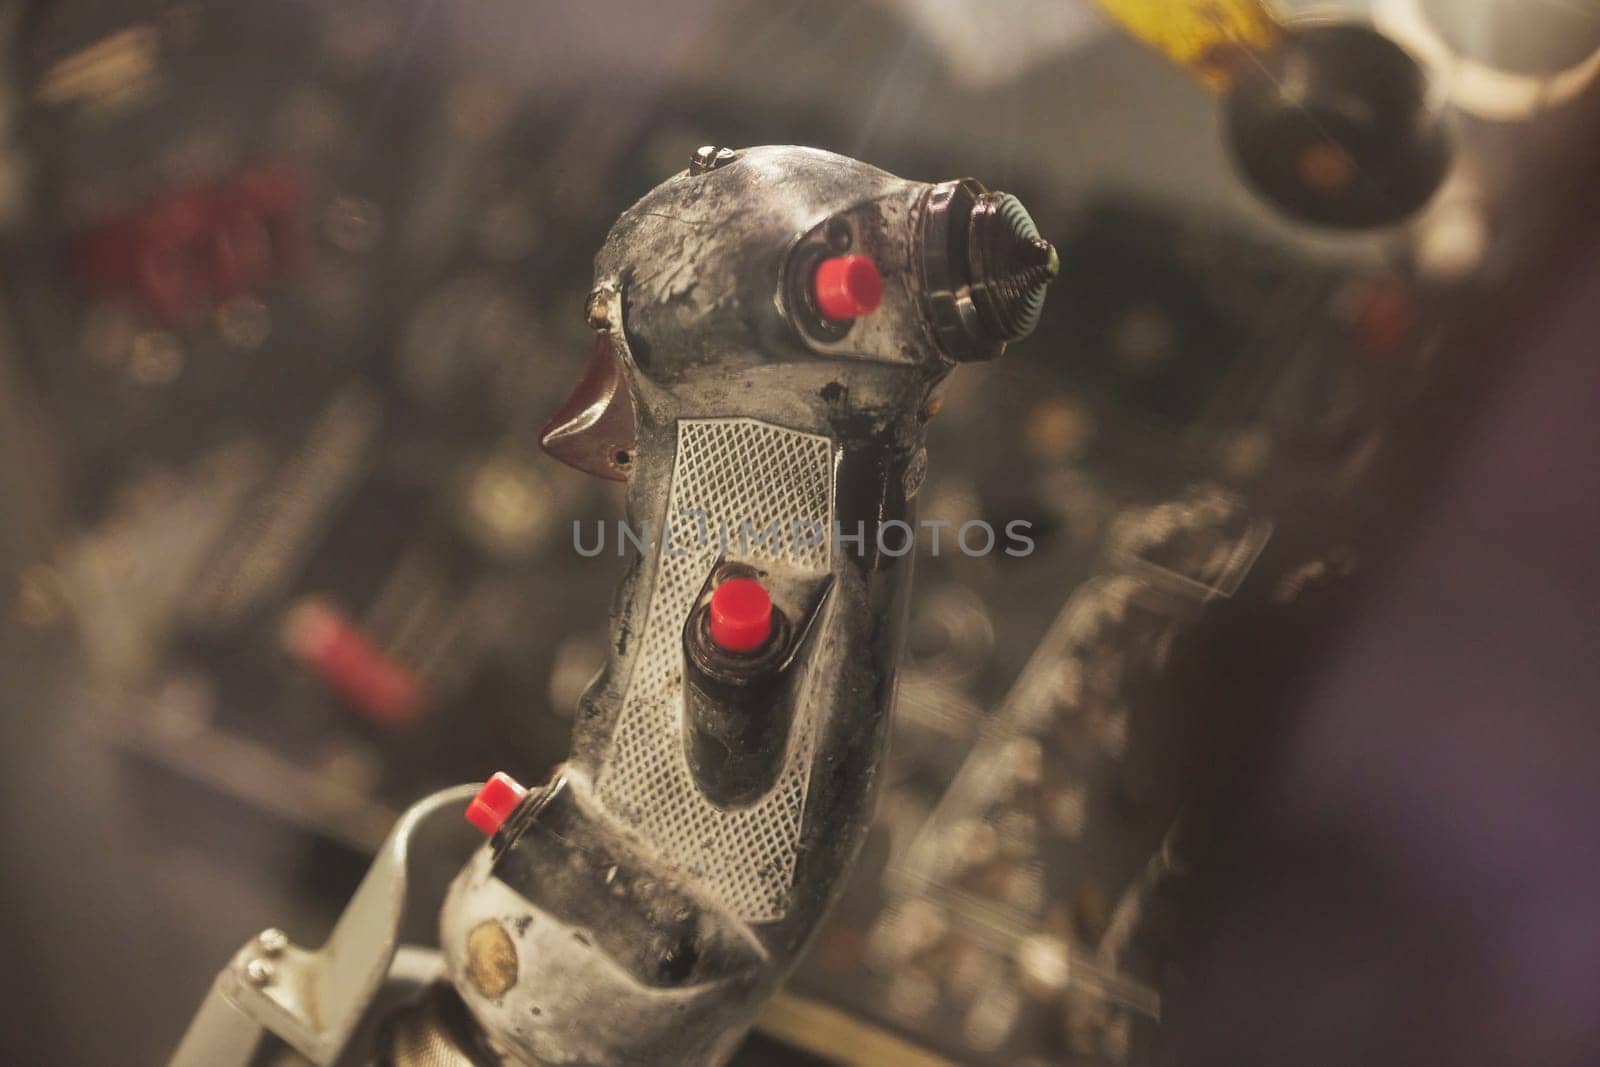 Joystick of an old jet fighter close-up in Denmark.